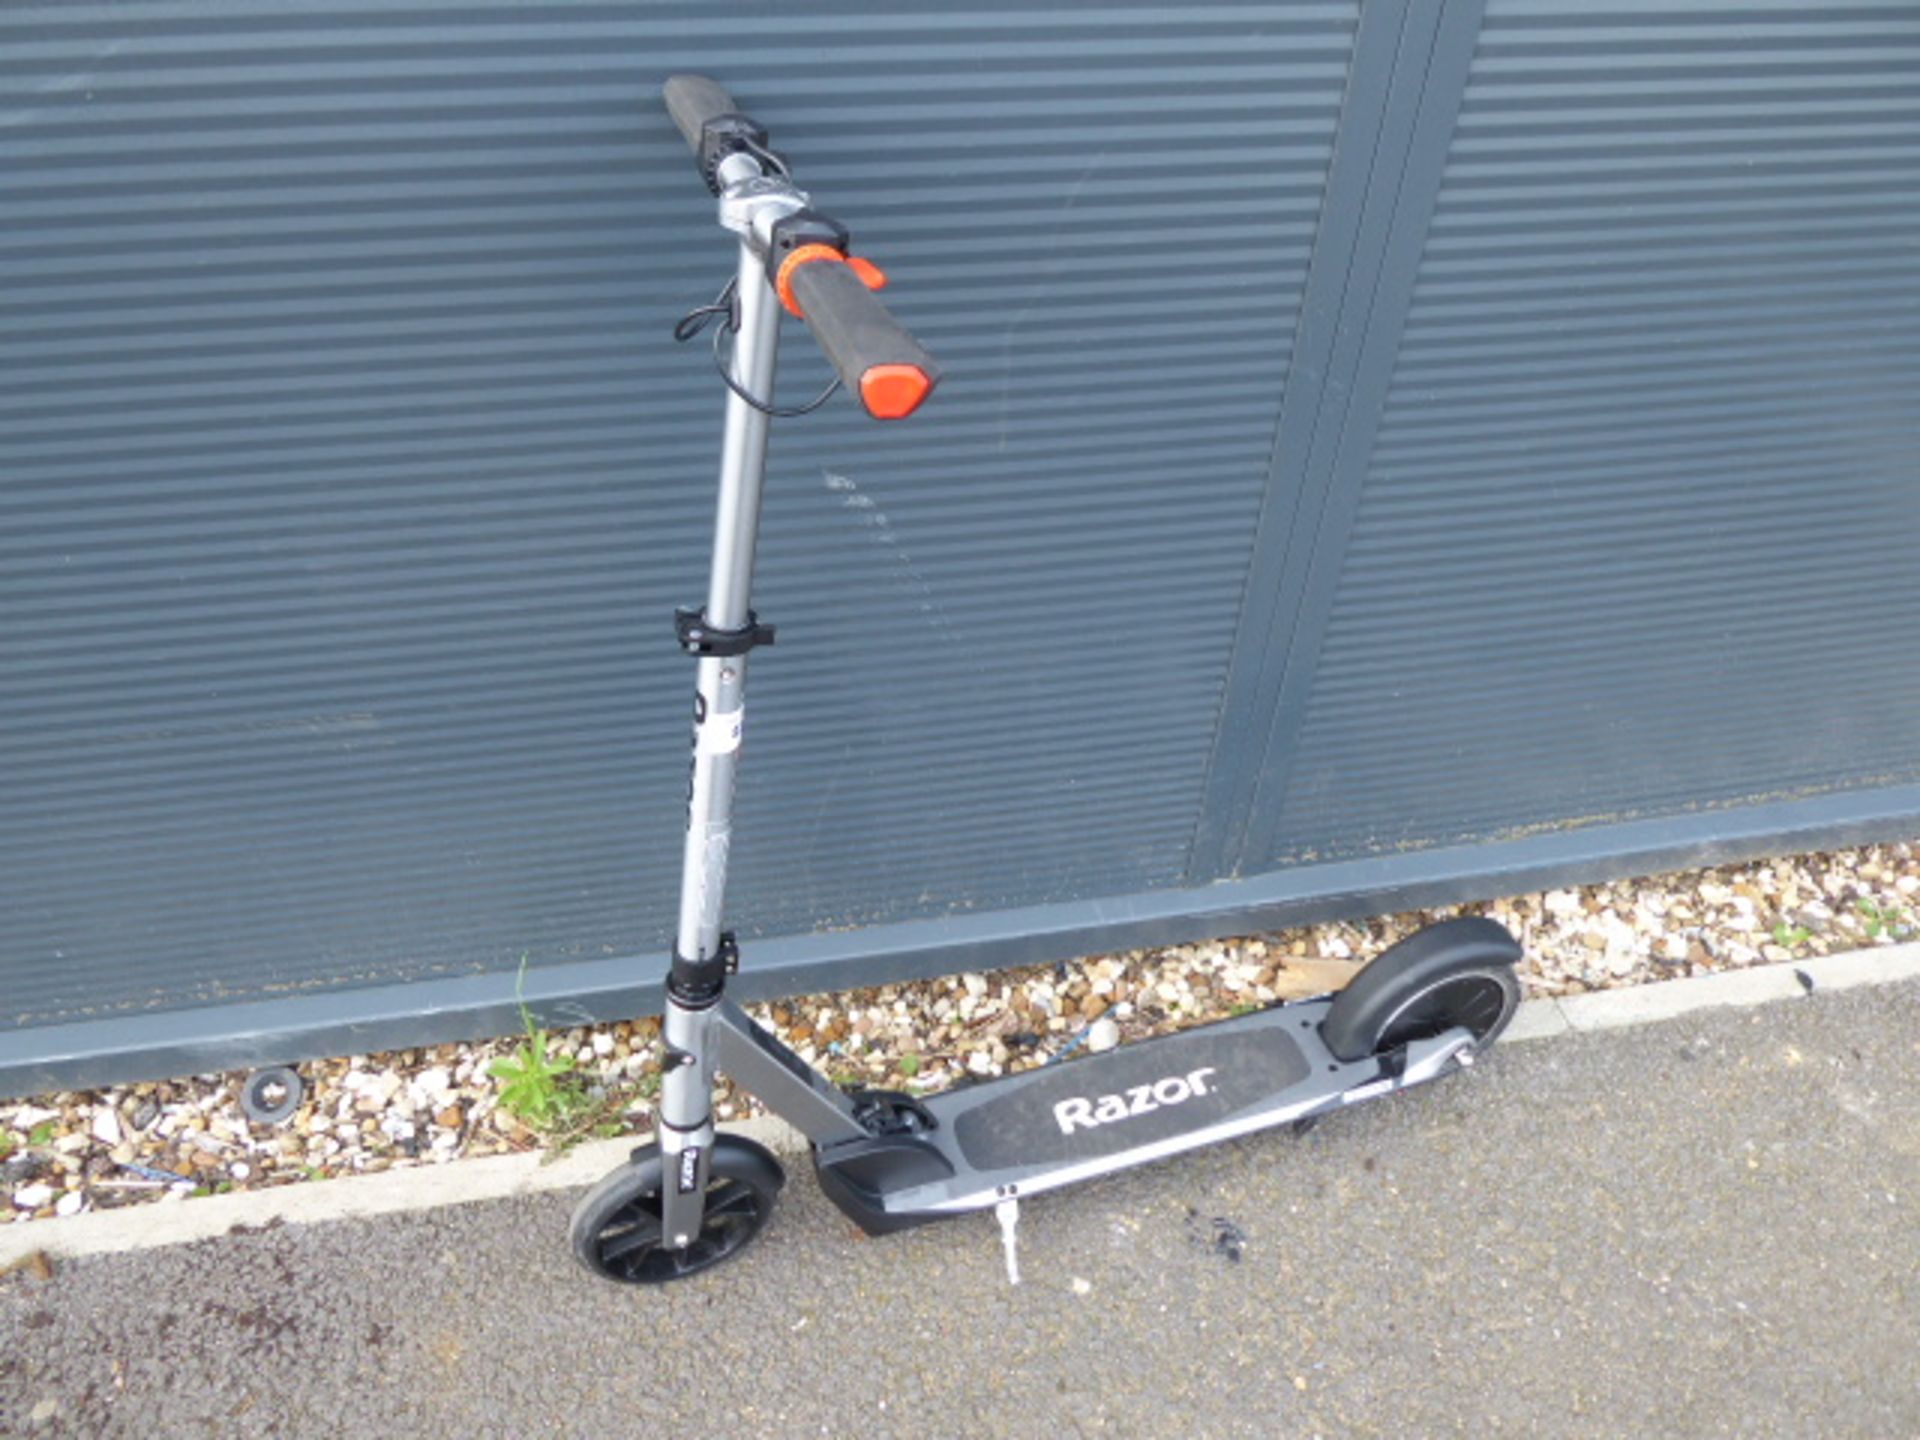 Razor silver electric scooter no charger